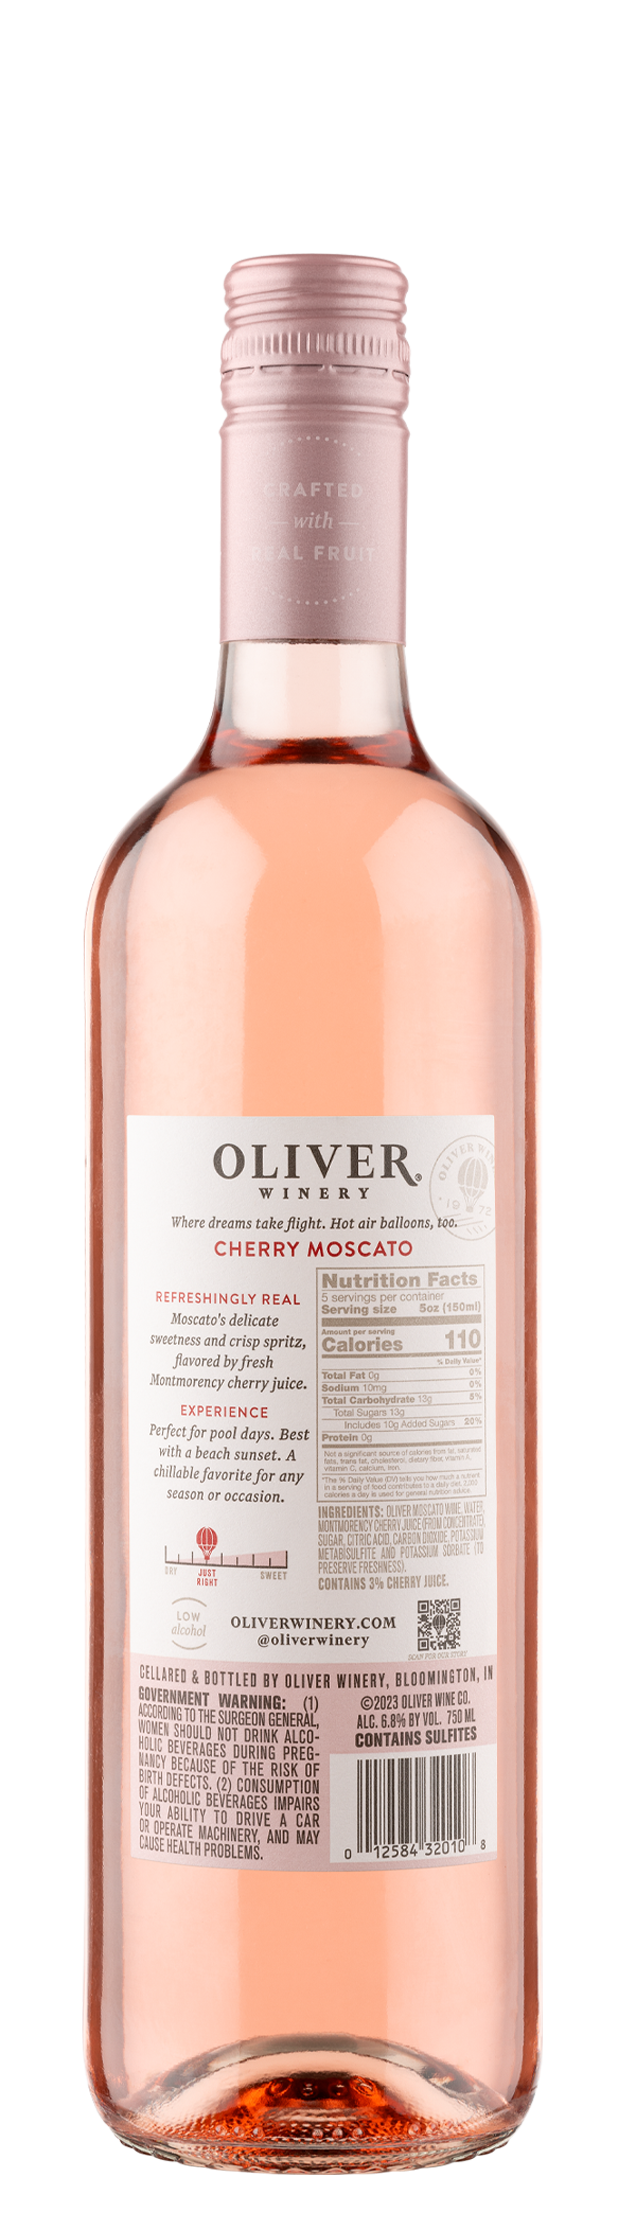 Oliver Winery Vine Series Cherry Moscato Nutrition Information